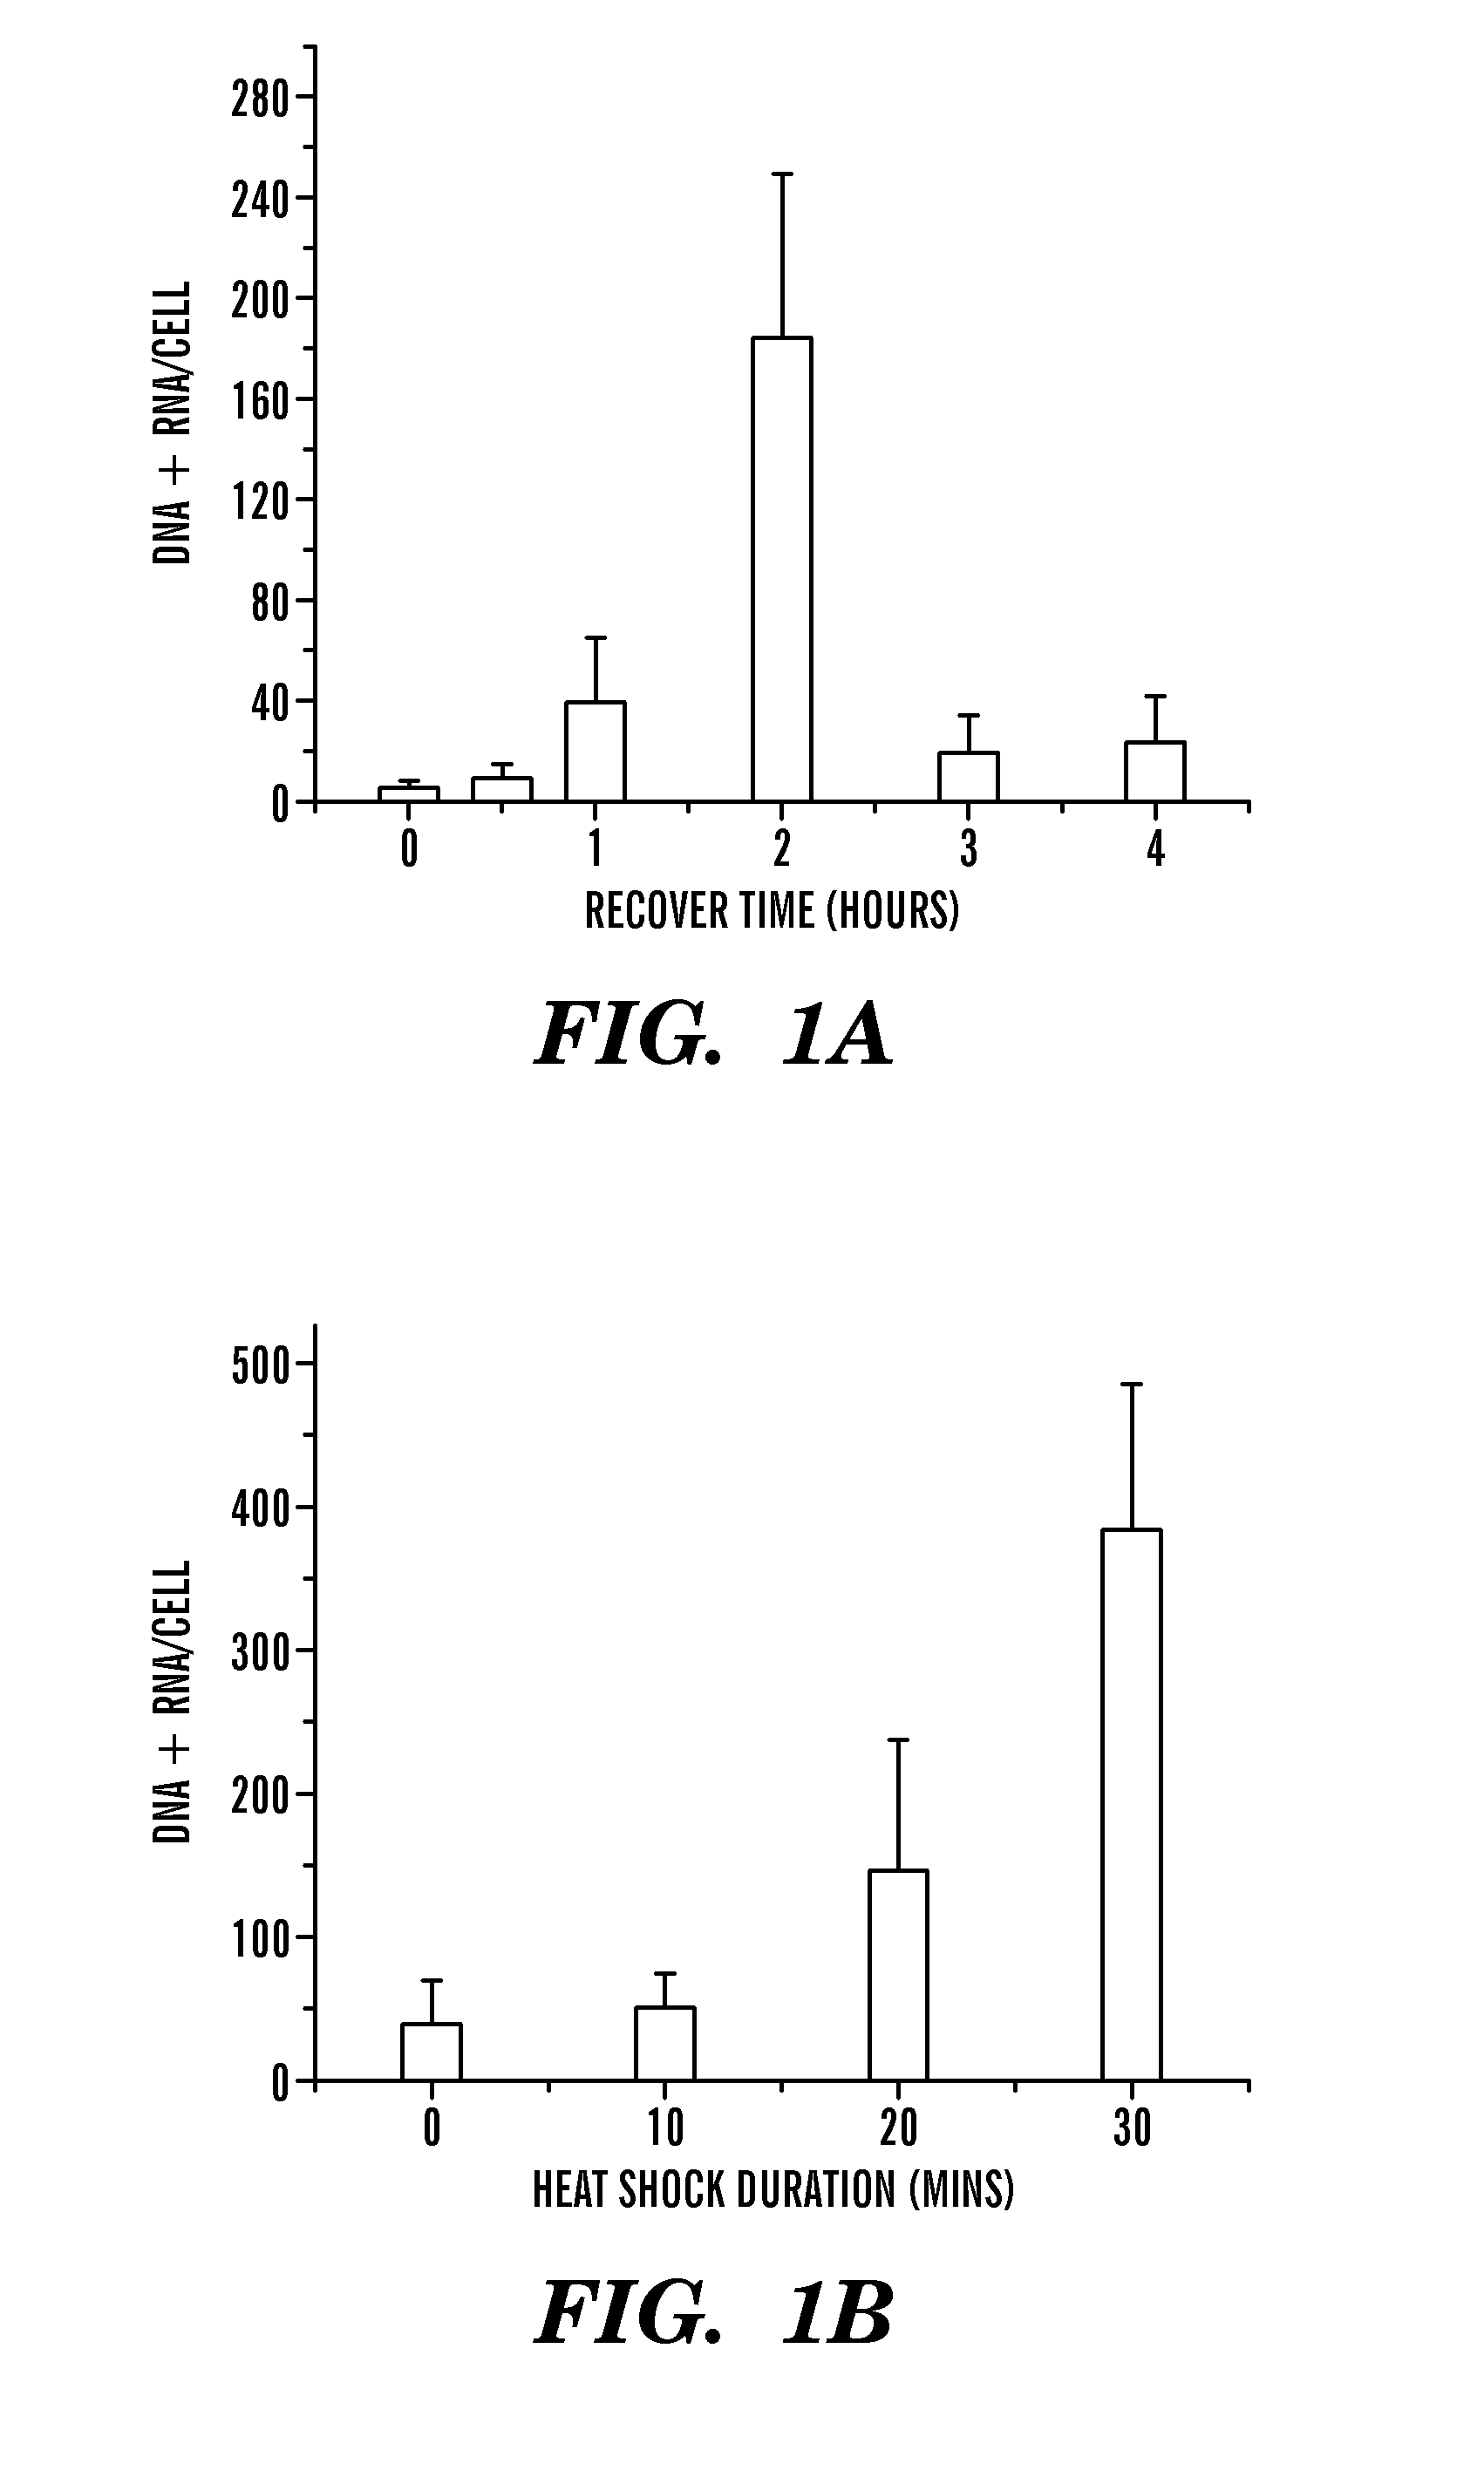 Methods for making embryonic cells, embryos, and animals sensitized to stress